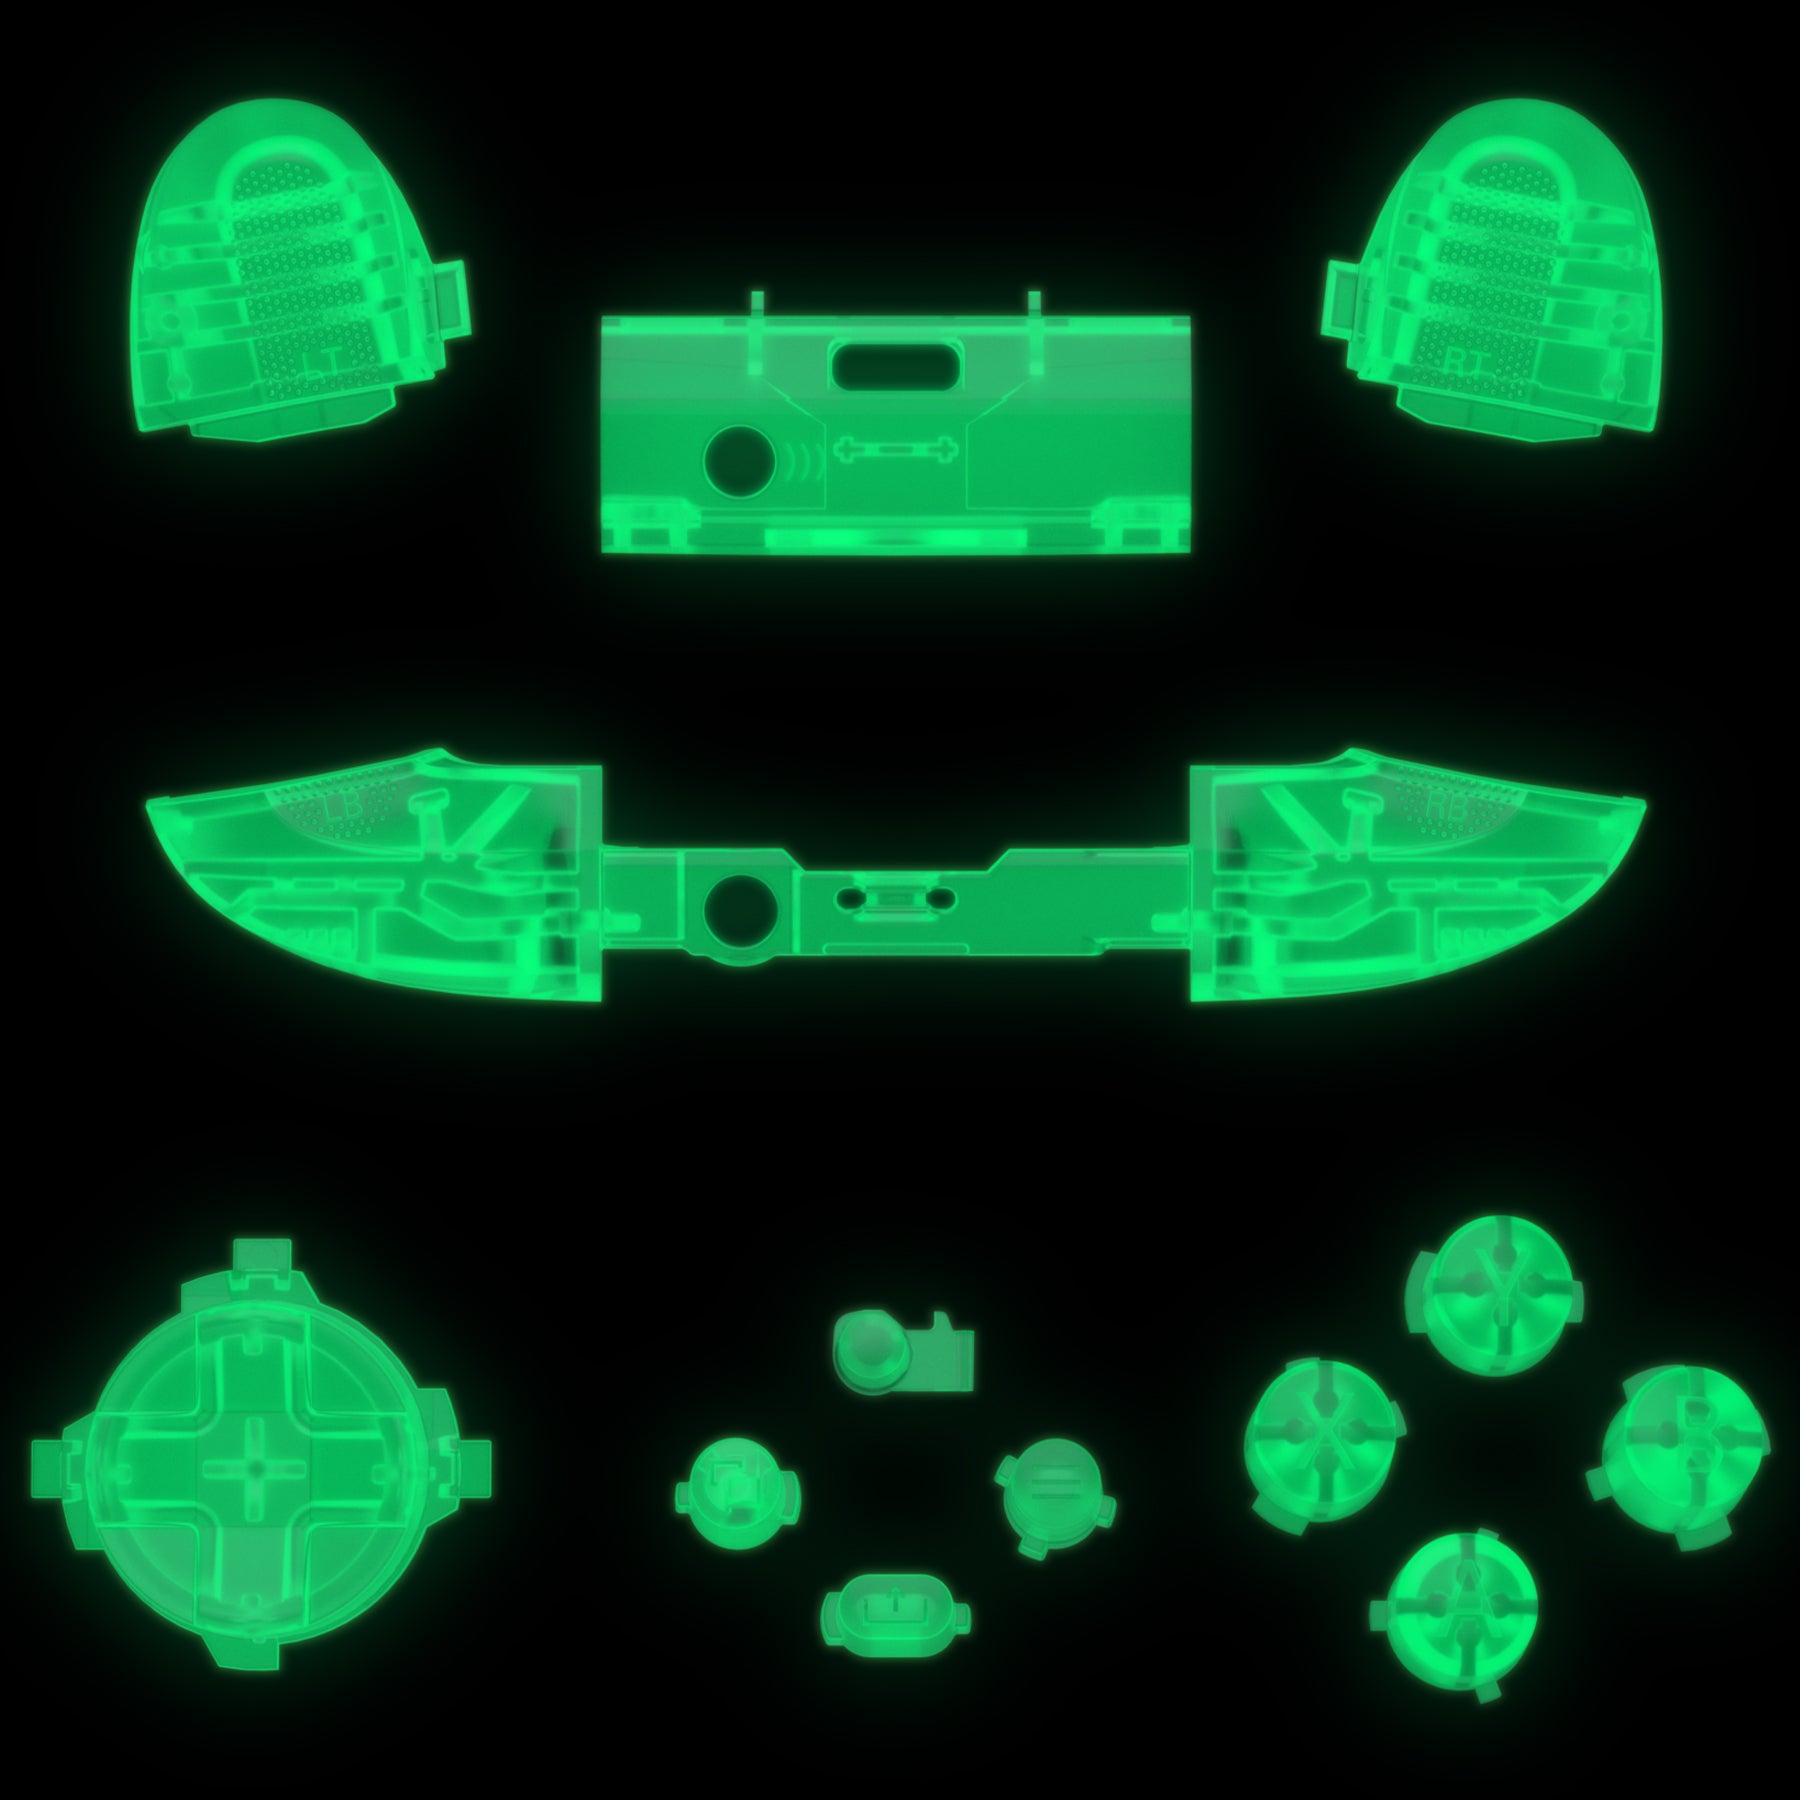 eXtremeRate Replacement Full Set Buttons for Xbox Series X & S Controller - Glow in Dark - Green eXtremeRate